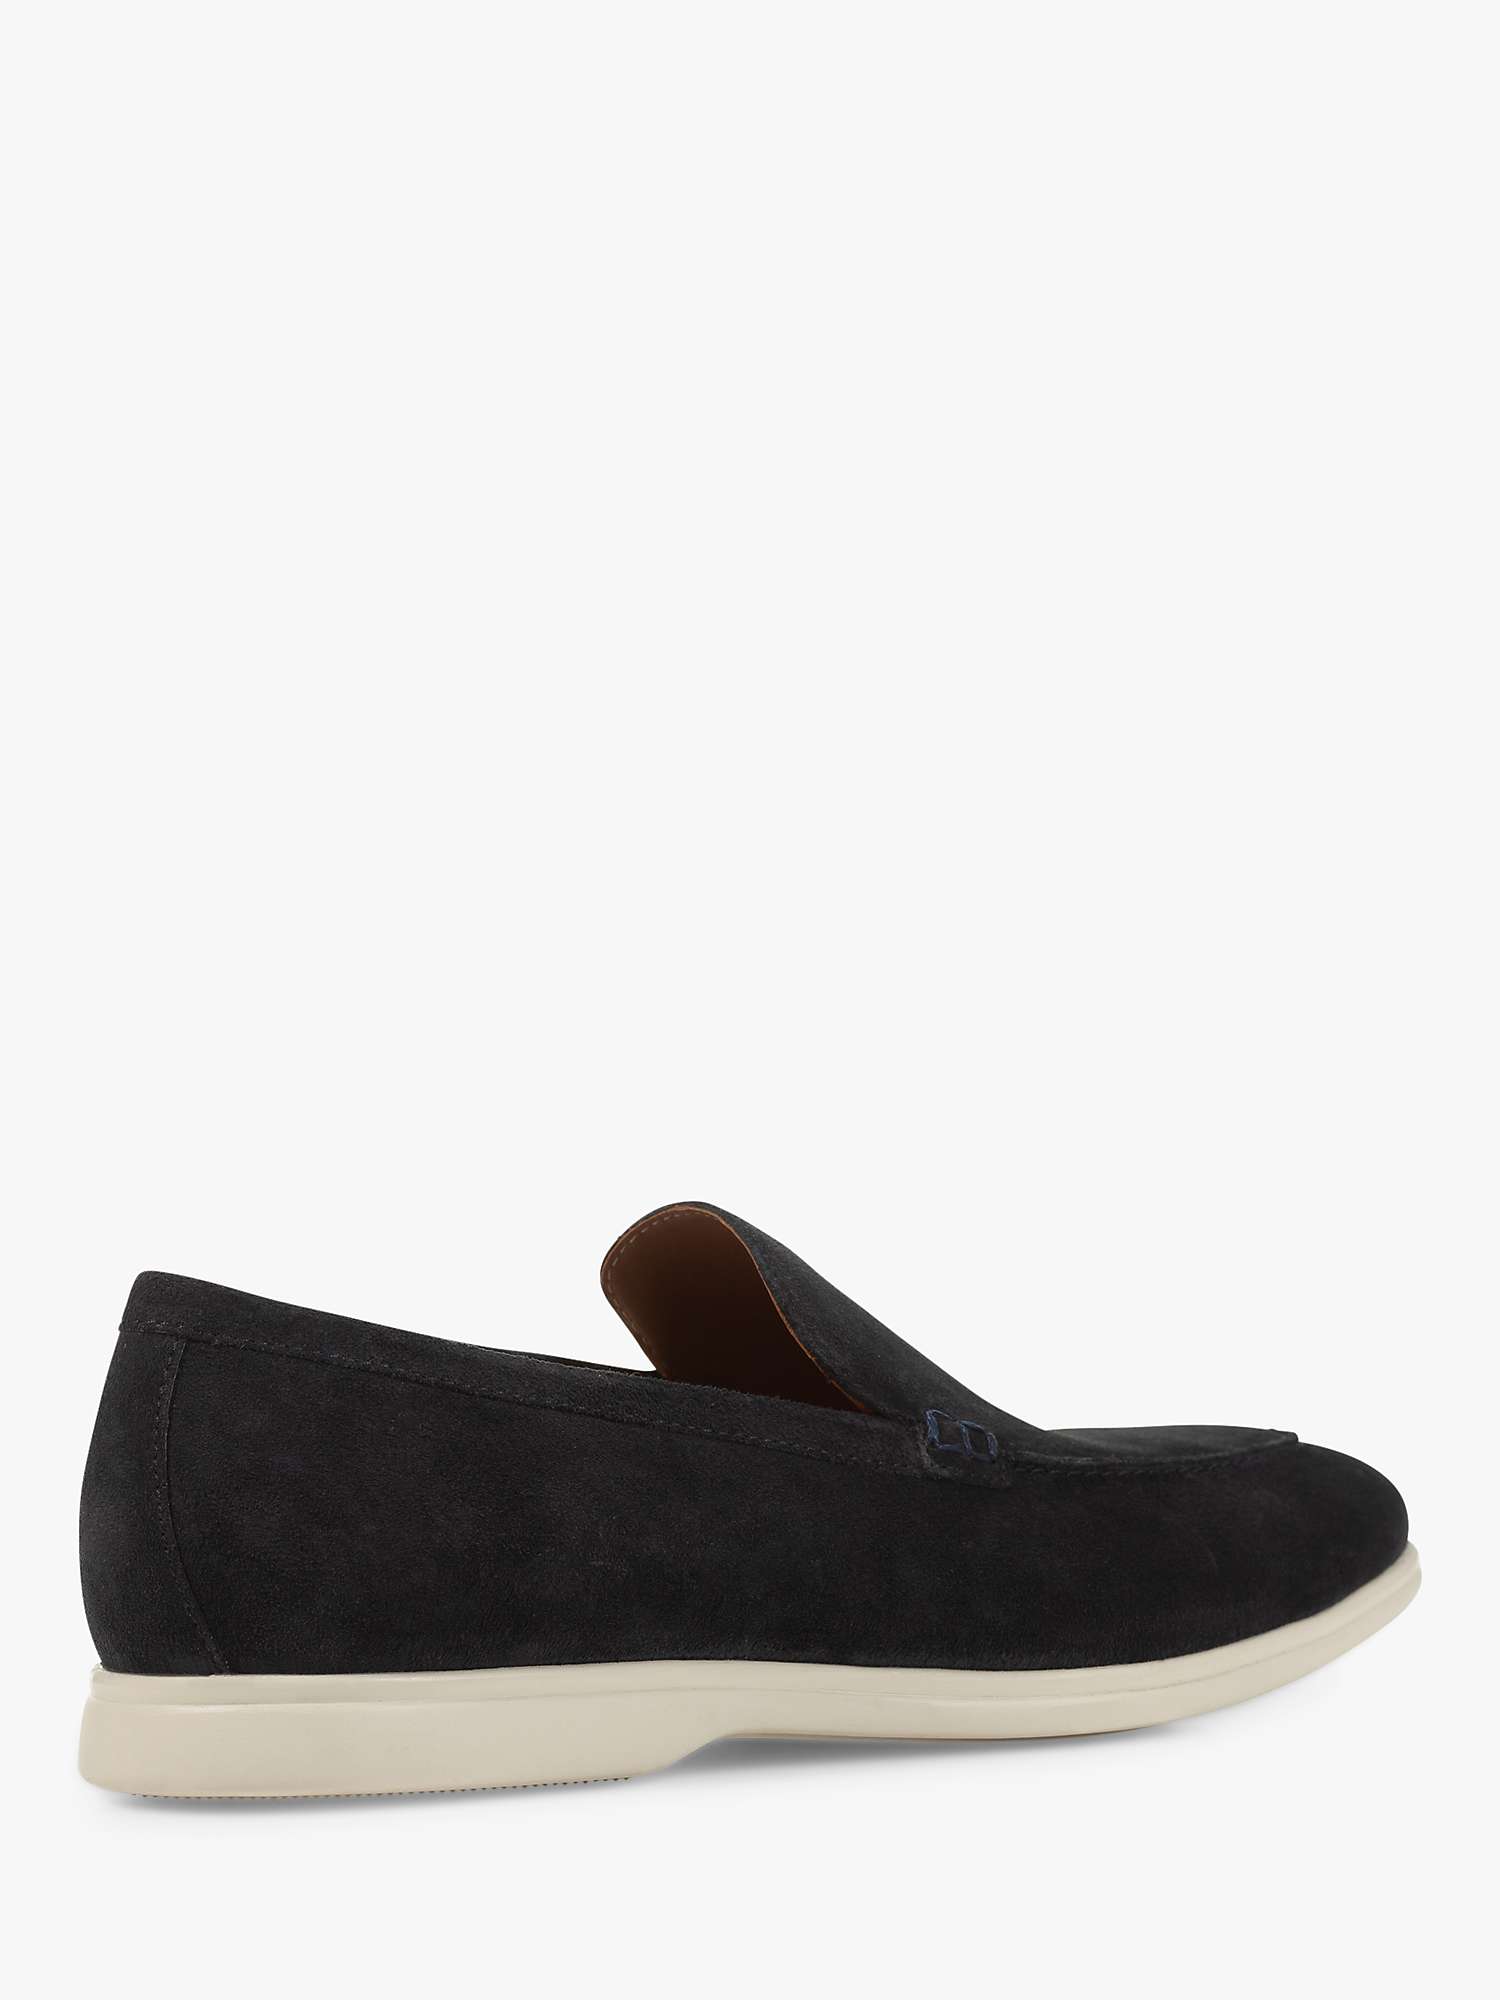 Geox Venzone Suede Loafers, Navy at John Lewis & Partners